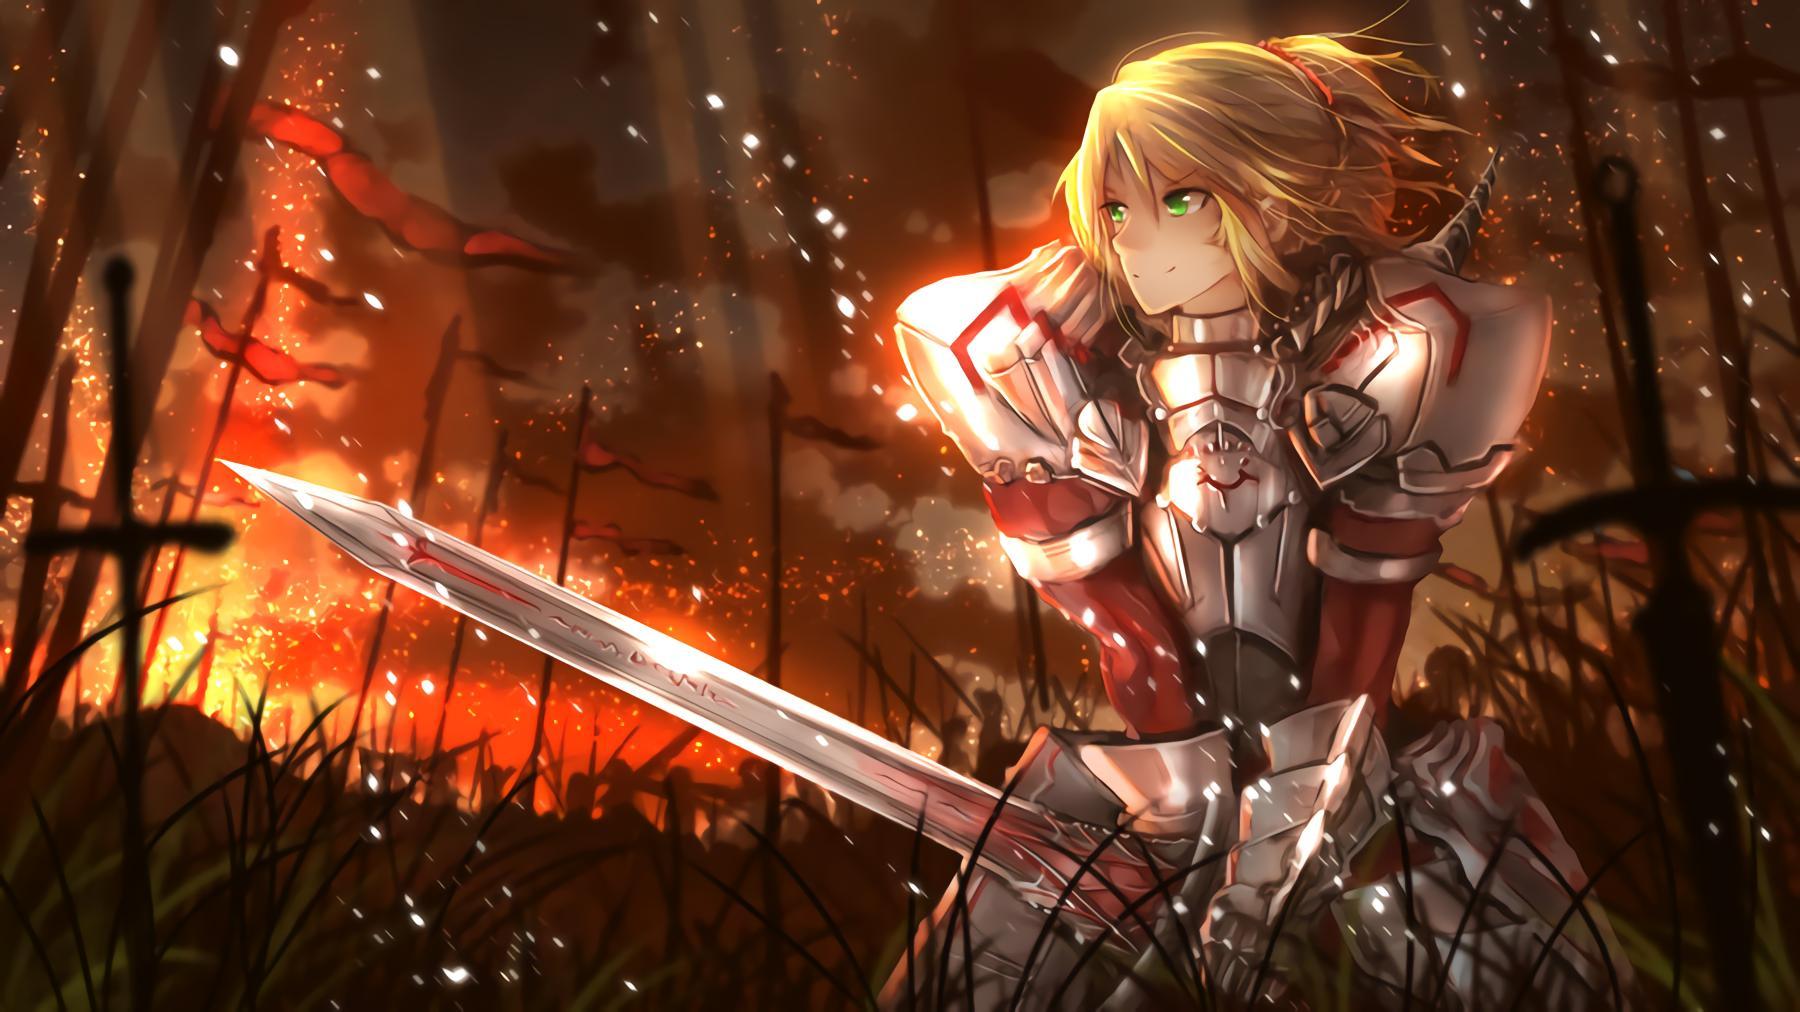 Fate/Apocrypha Wallpapers - Wallpaper Cave